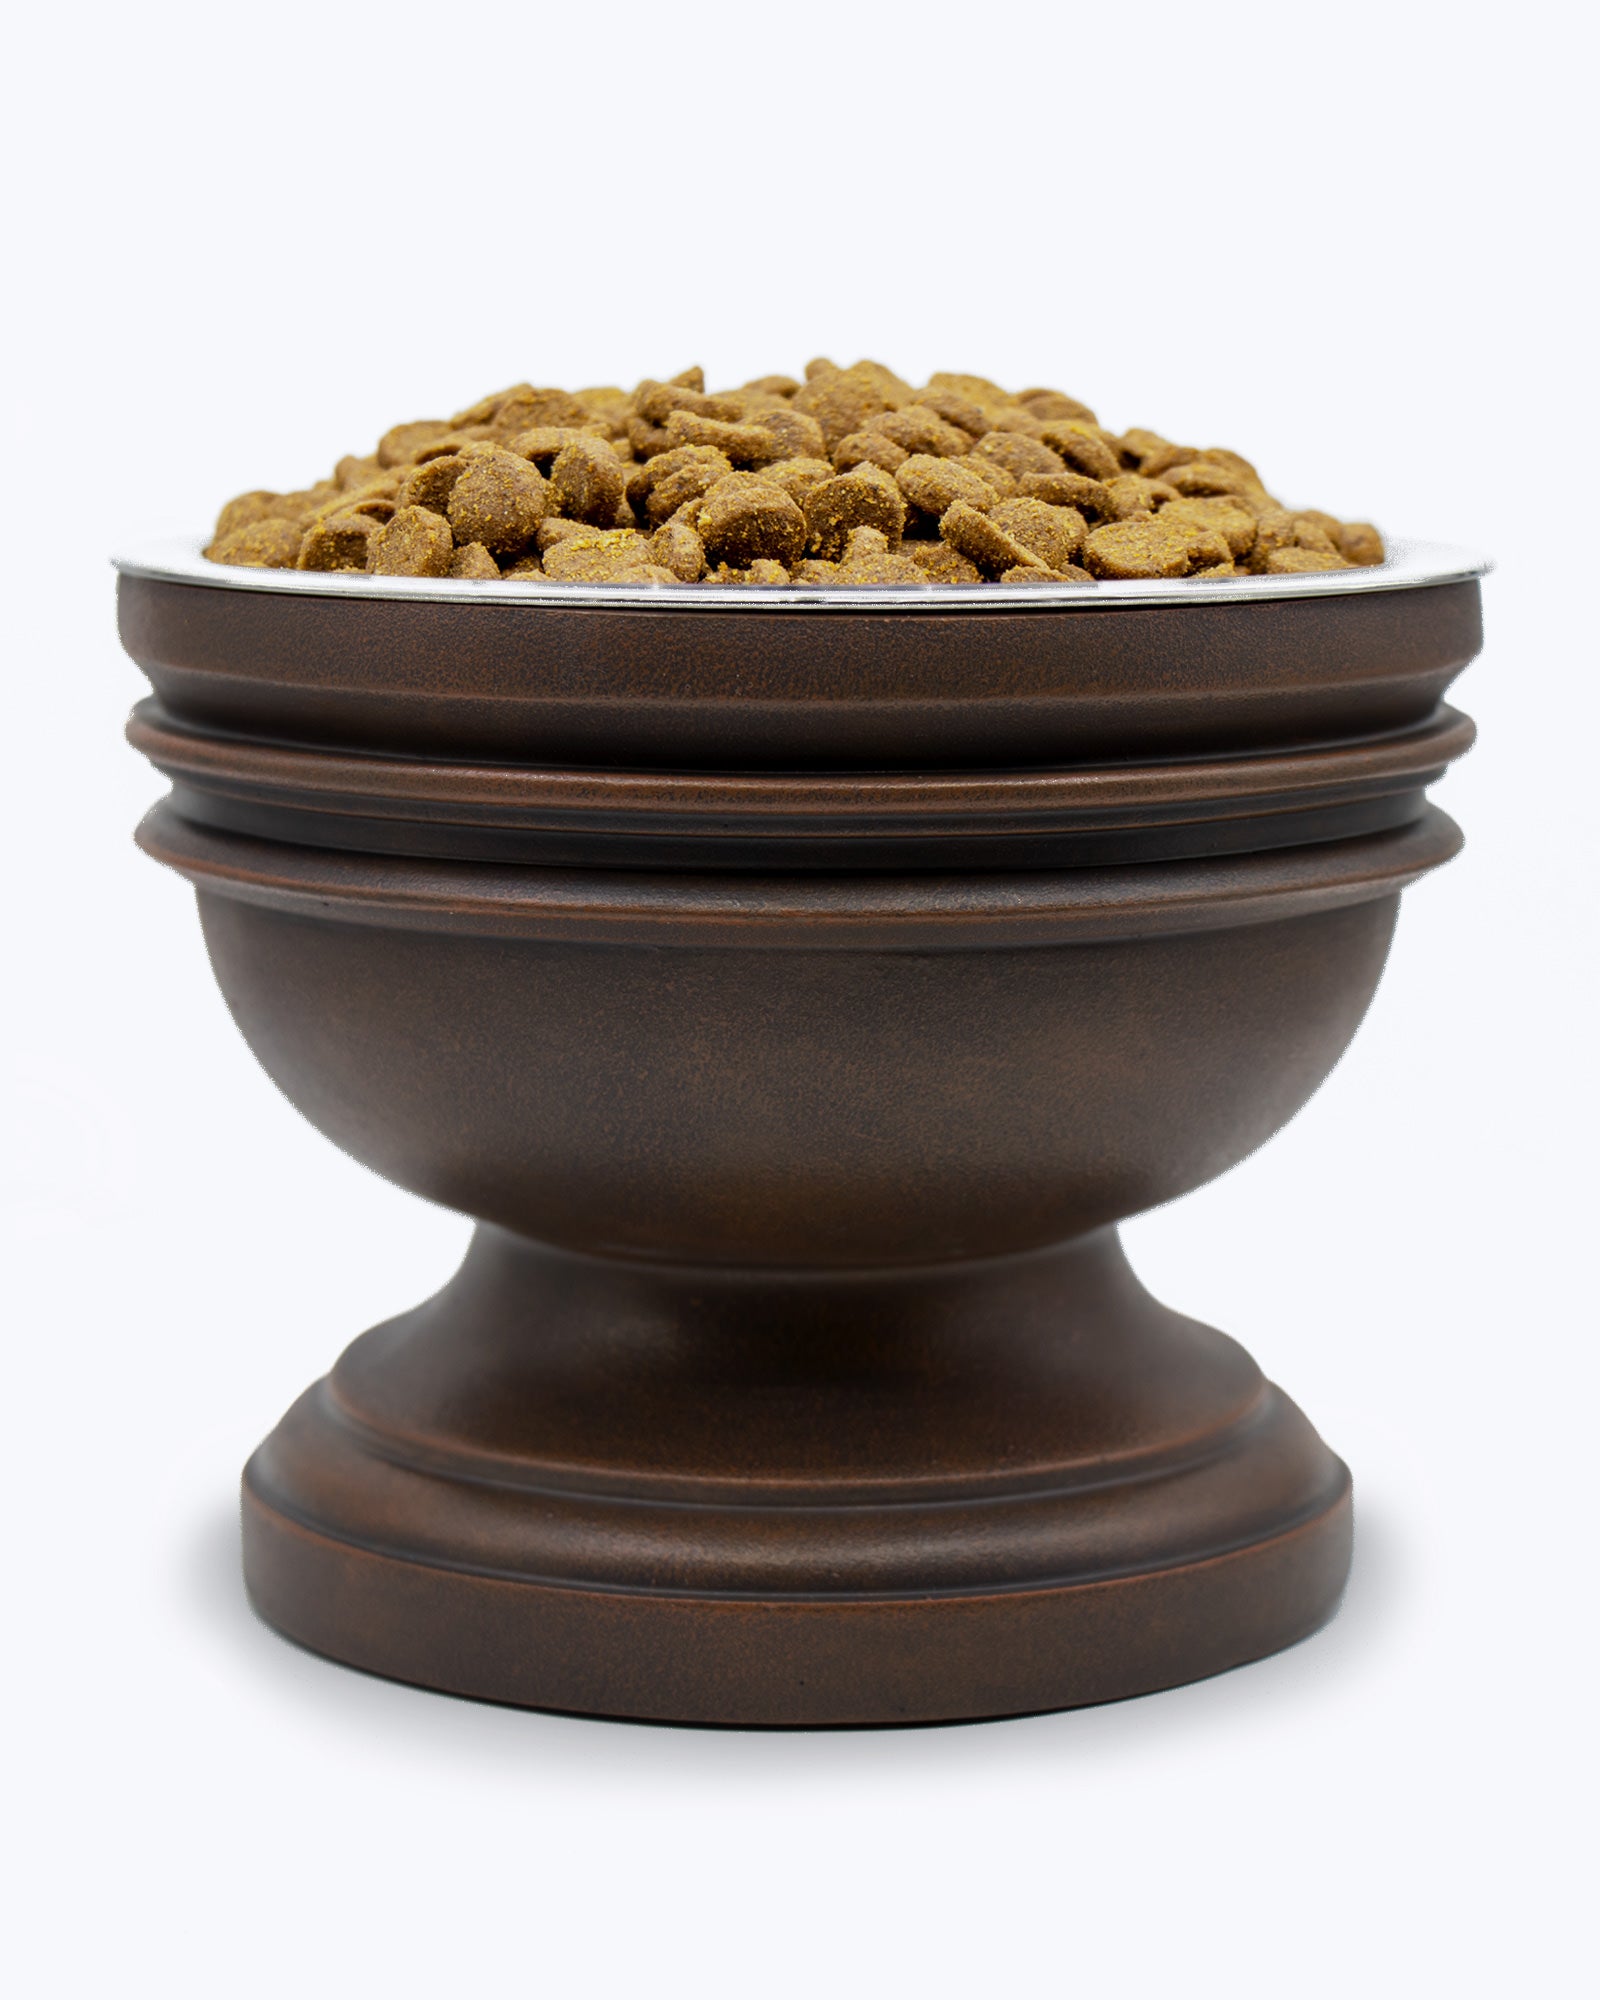 Pet Junkie Elevated Dog Bowl Jackson, Small - 3 inch / 16oz, Brown